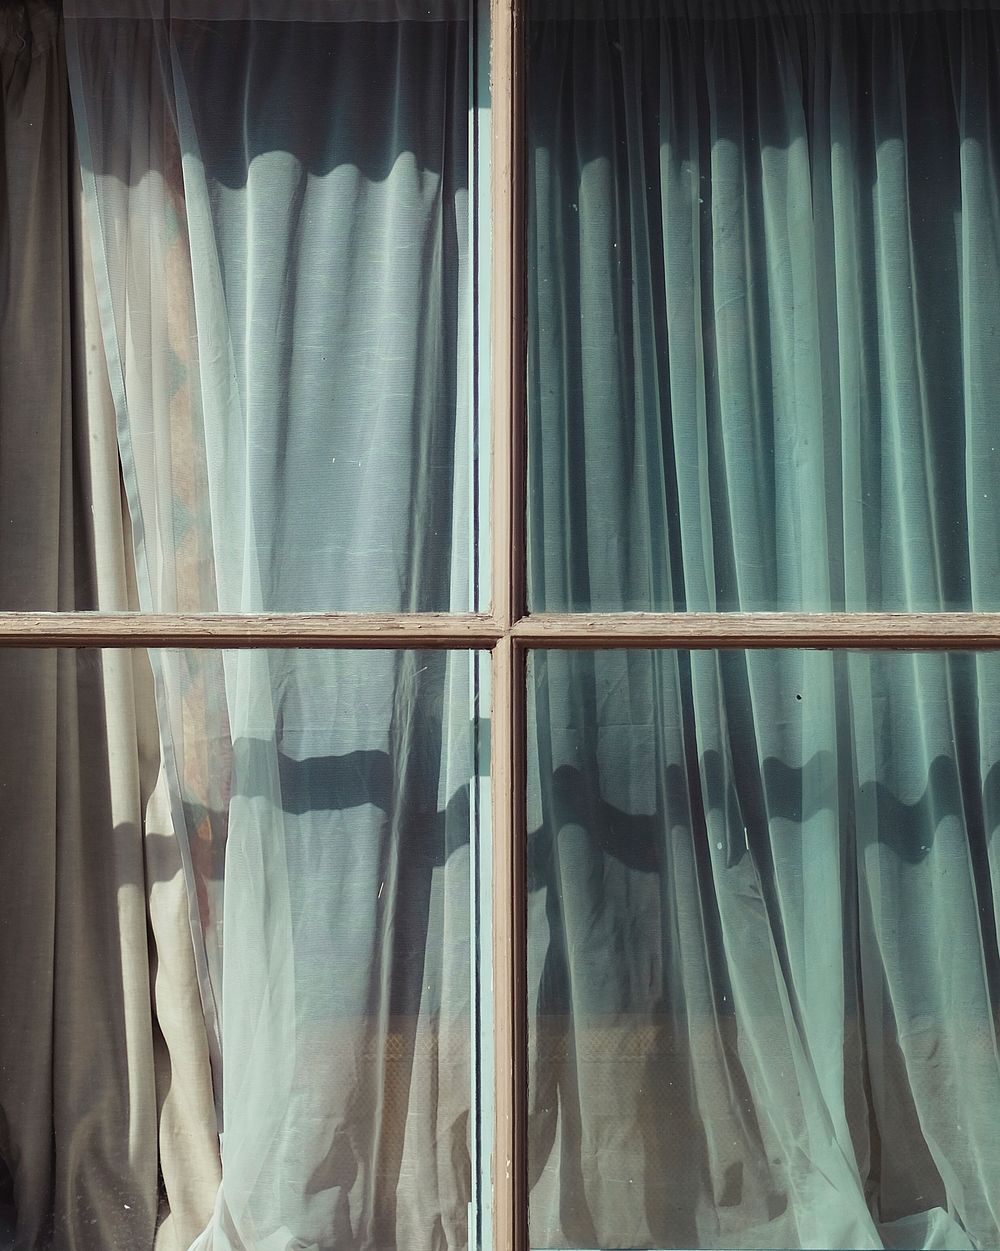 A curtain seen through a window. Original public domain image from Wikimedia Commons